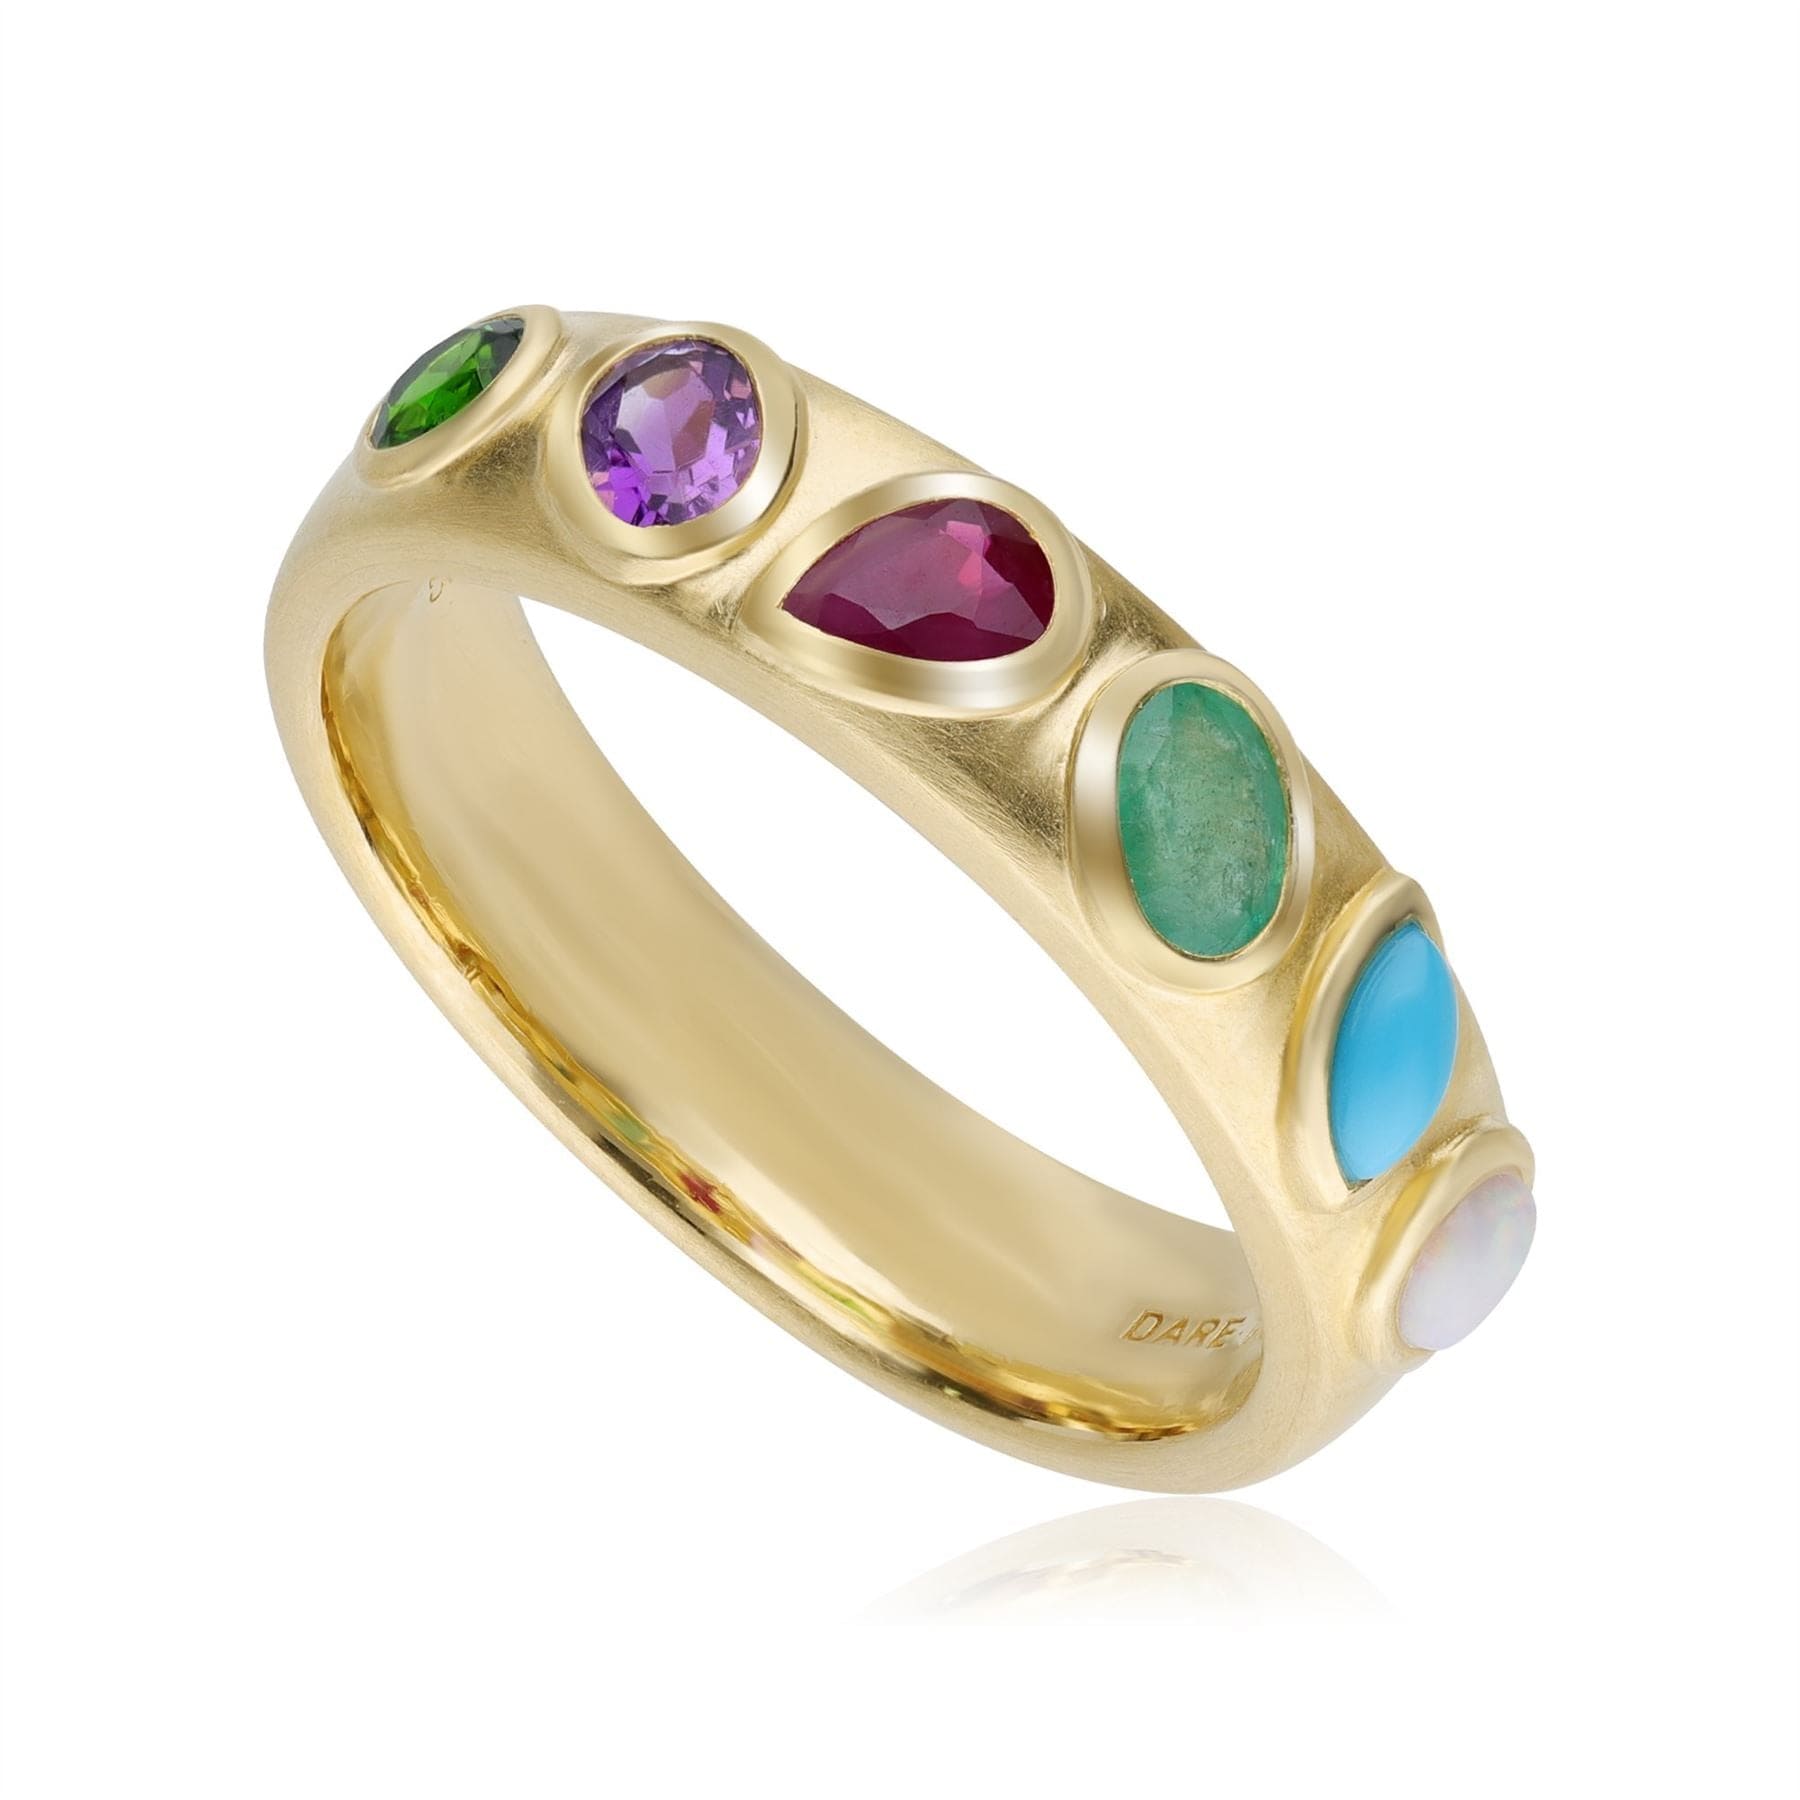 Coded Whispers 'Dare To' Acrostic Gemstone Ring In Yellow Gold Plated Silver - Gemondo